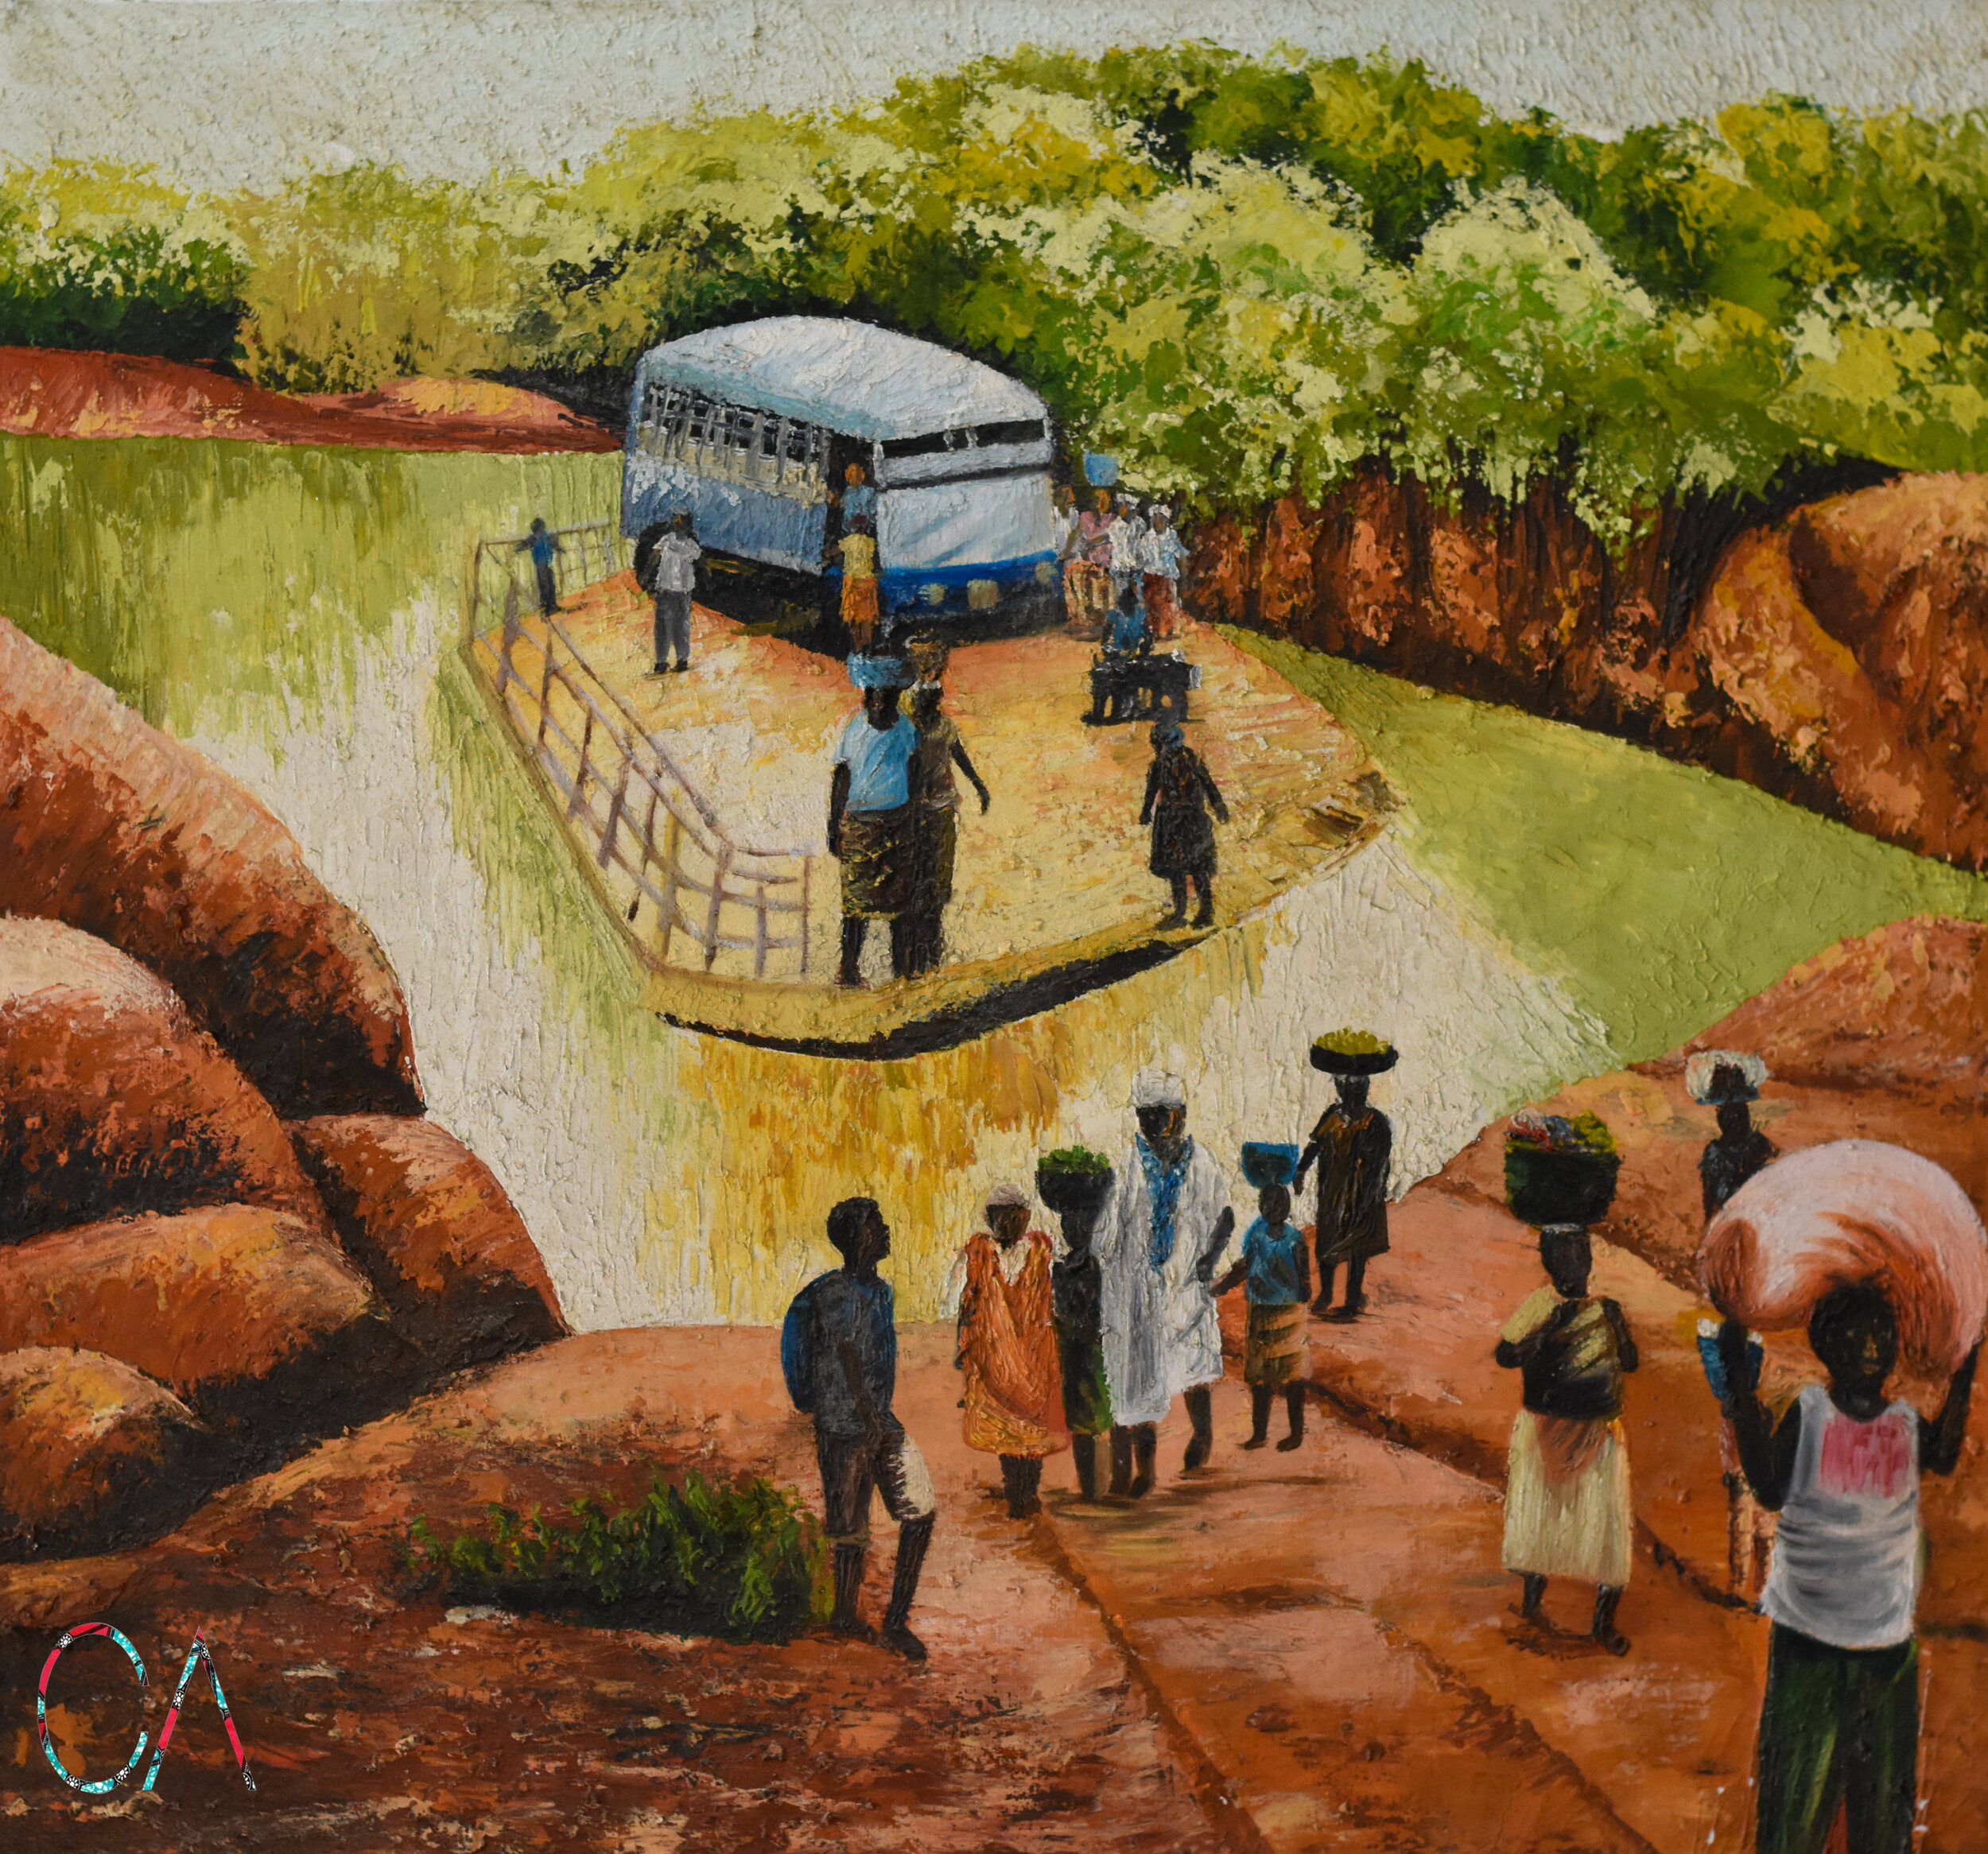 LIBERIAN VILLAGERS, 38x36 inches $300